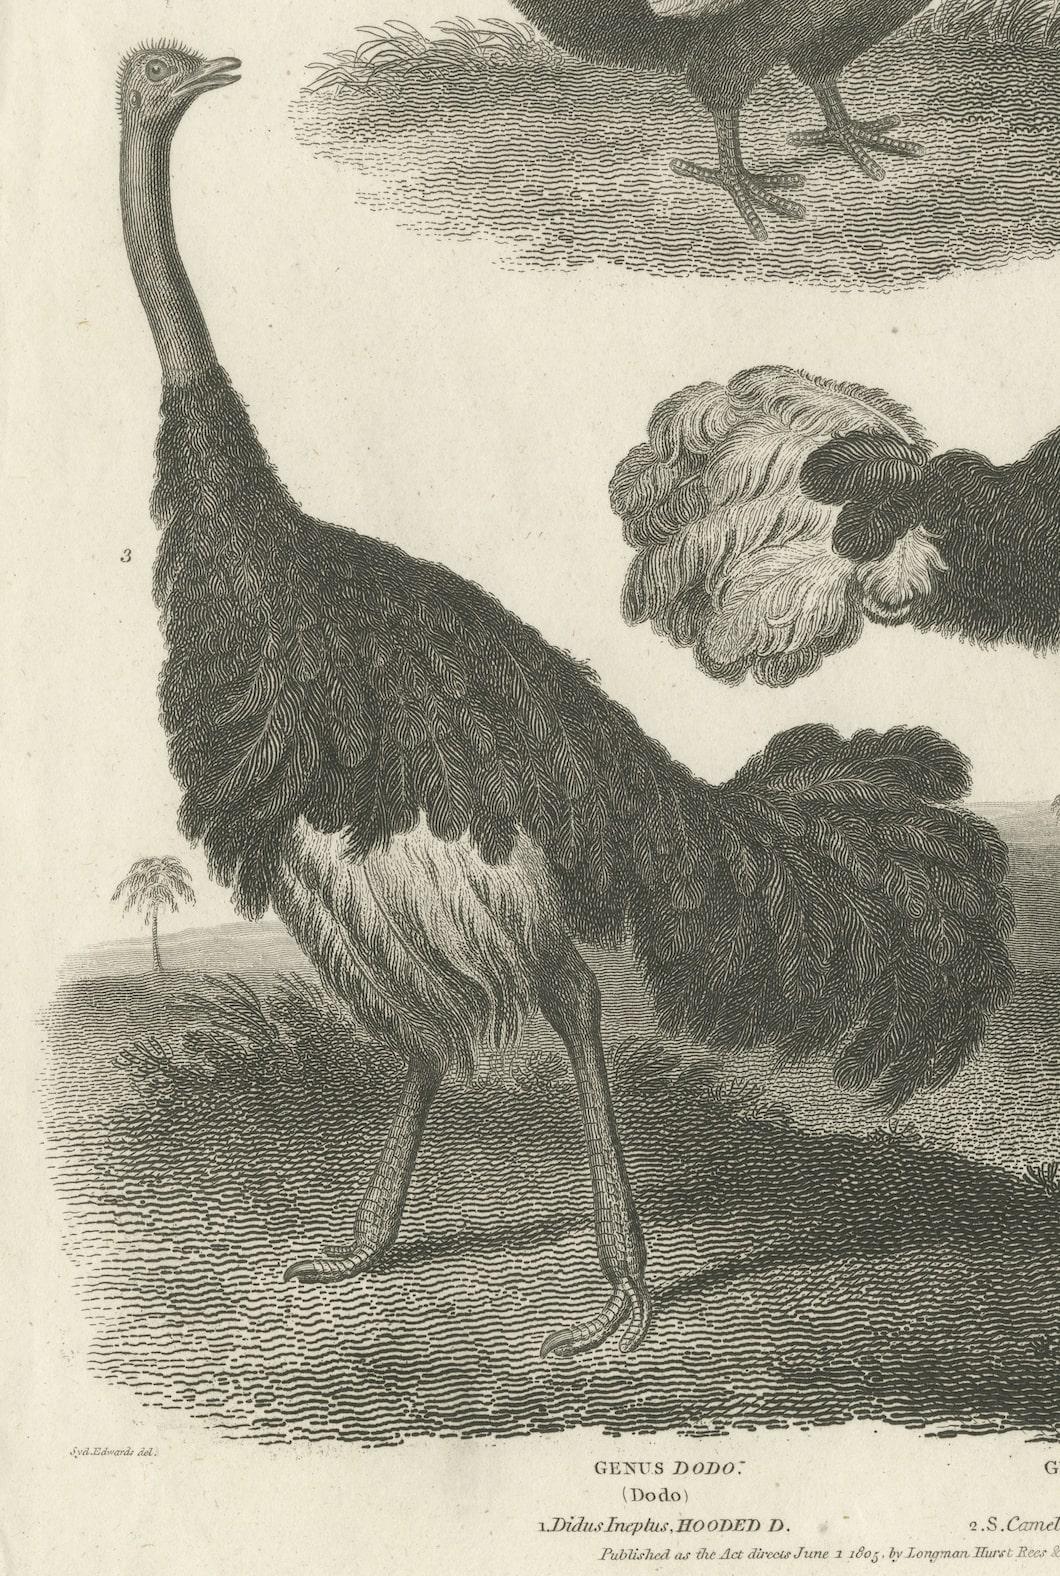 Engraved Echoes of Avian Majesty: The Dodo and Ostrich of the Early 19th Century, 1805